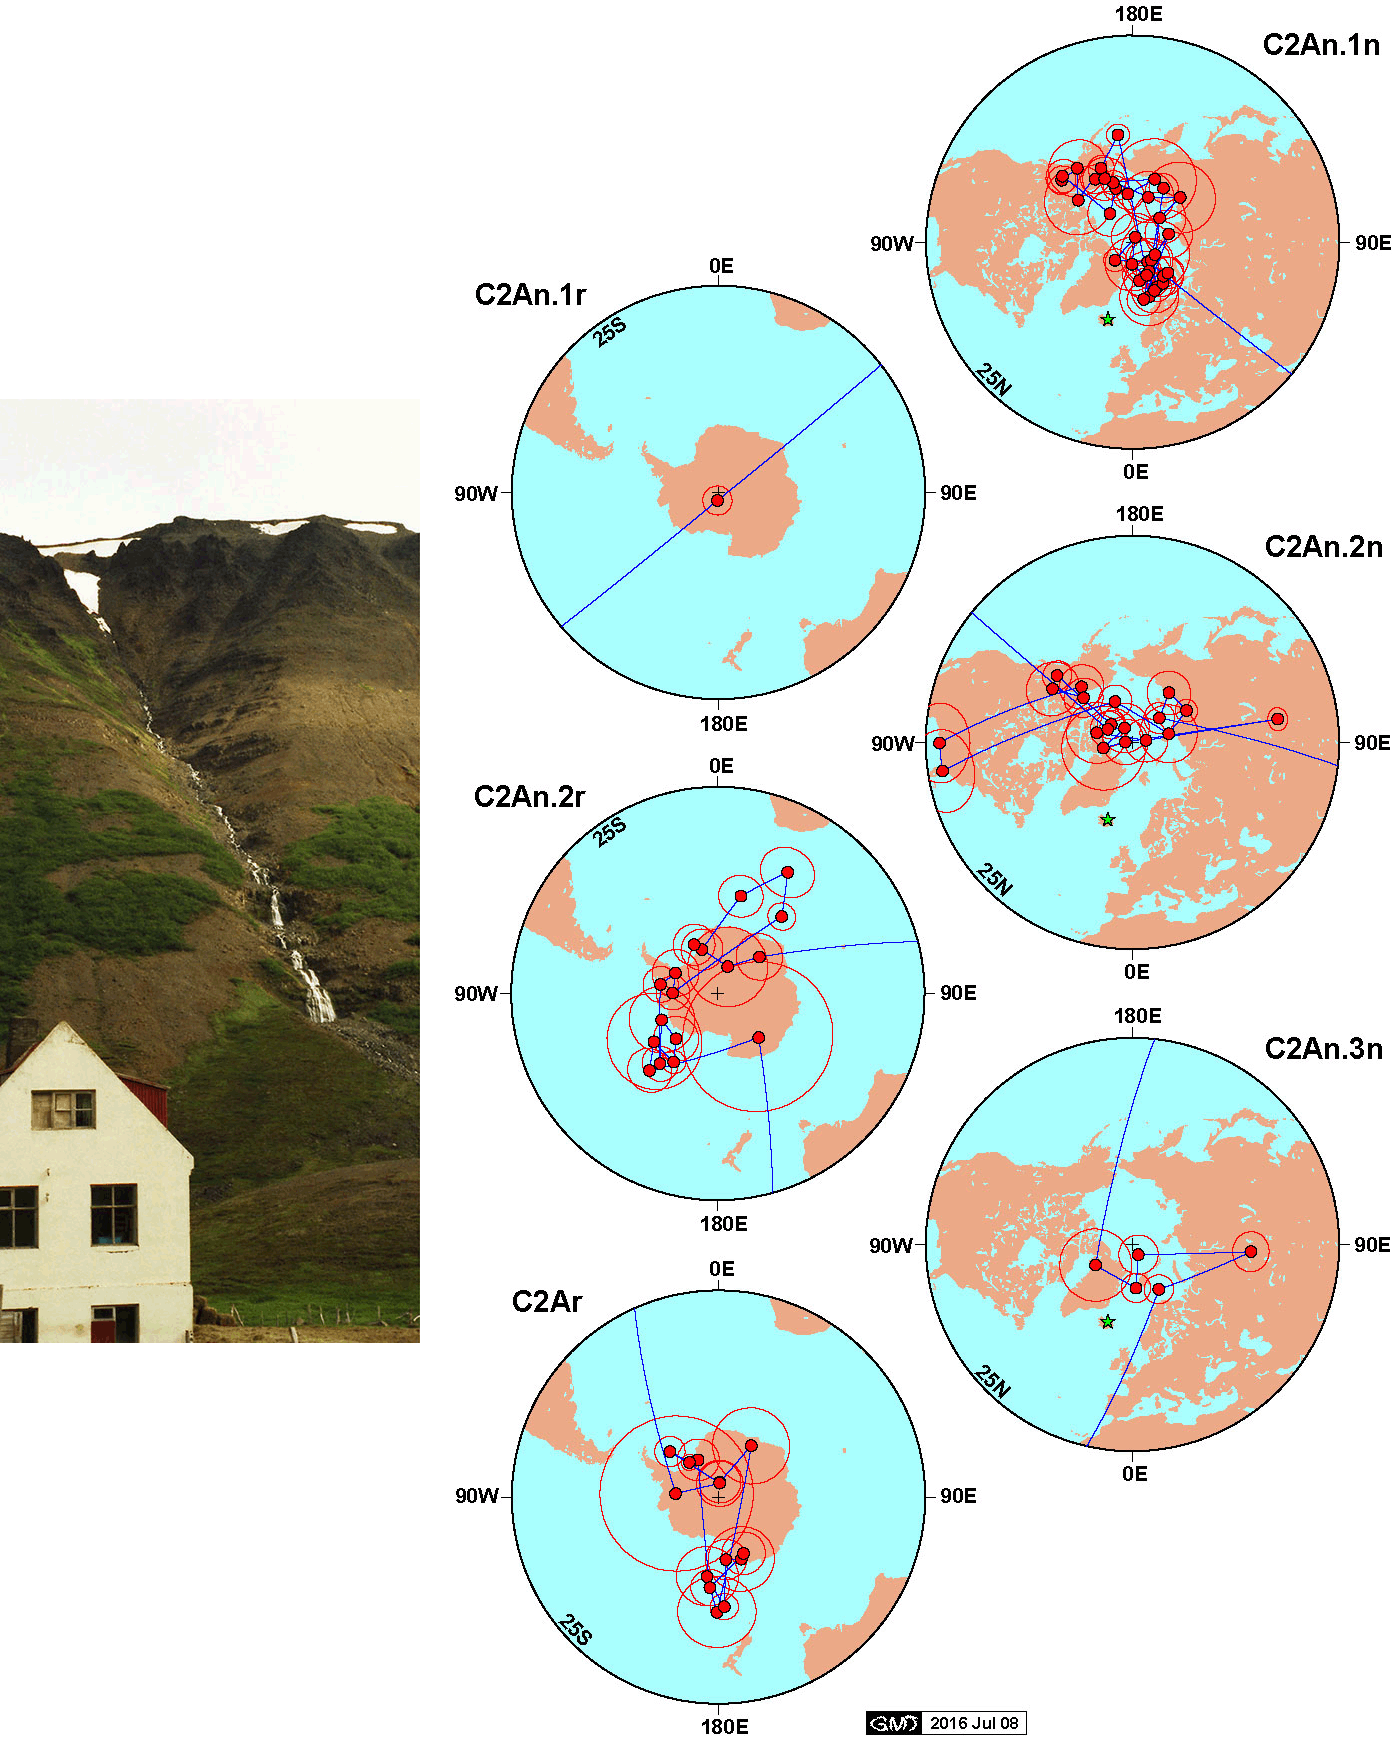 Lava flow sequences at Storutjarnir (left) and detailed record of geomagnetic reversals and paleomagnetic secular variation (right).